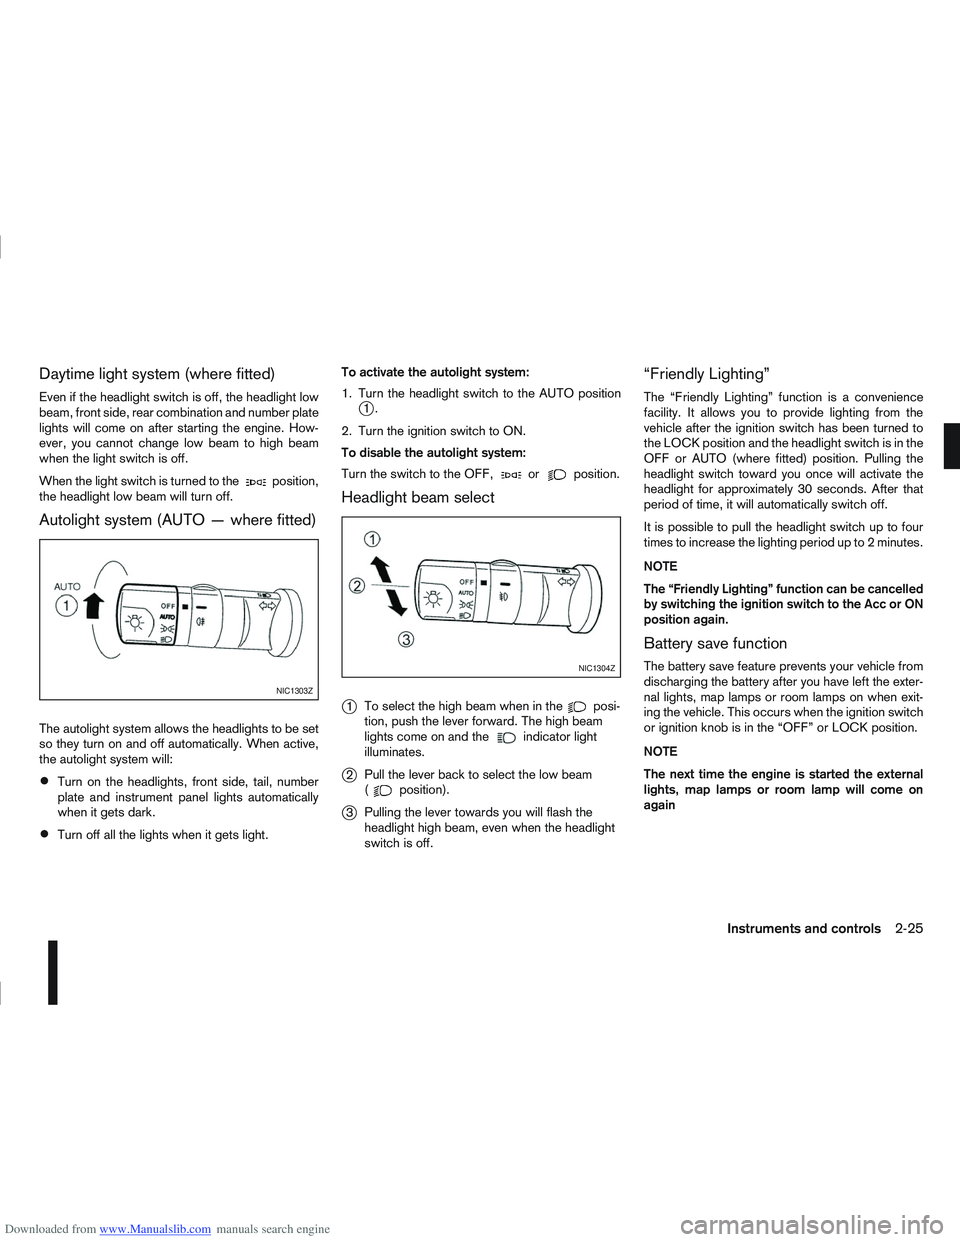 NISSAN QASHQAI 2009  Owners Manual Downloaded from www.Manualslib.com manuals search engine Daytime light system (where fitted)
Even if the headlight switch is off, the headlight low
beam, front side, rear combination and number plate
